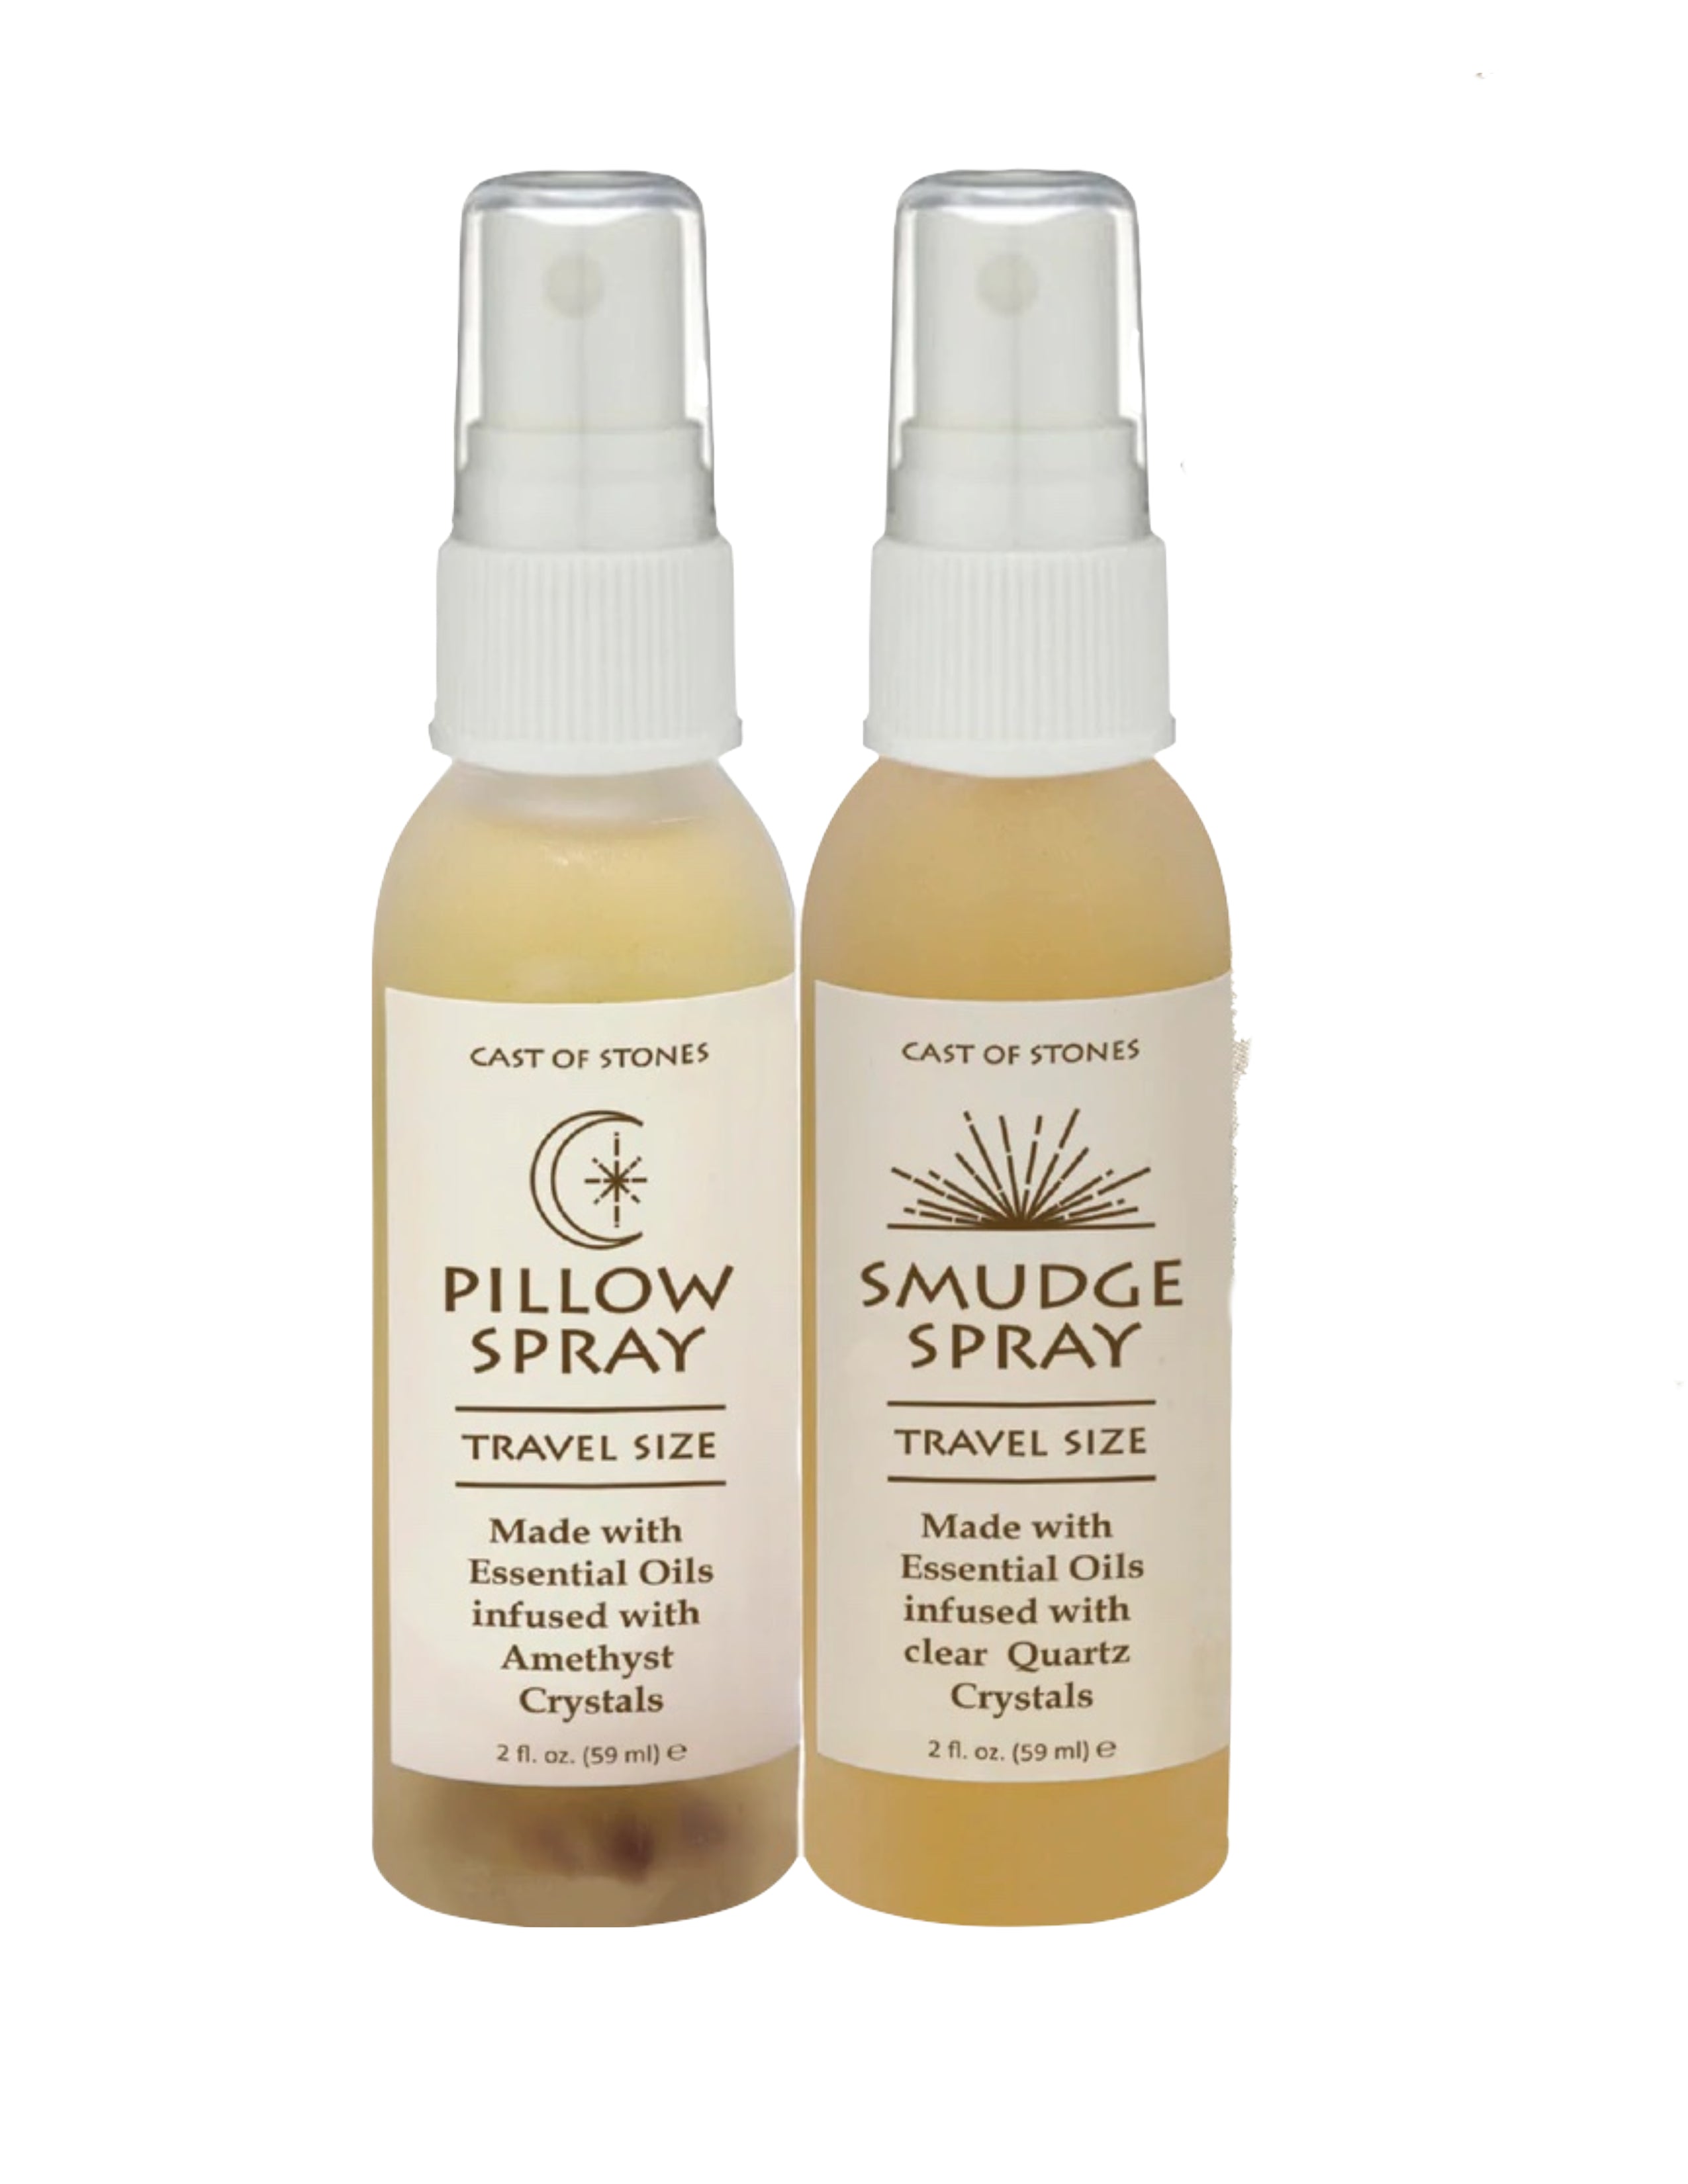 Travel Sprays - Smudge and Pillow